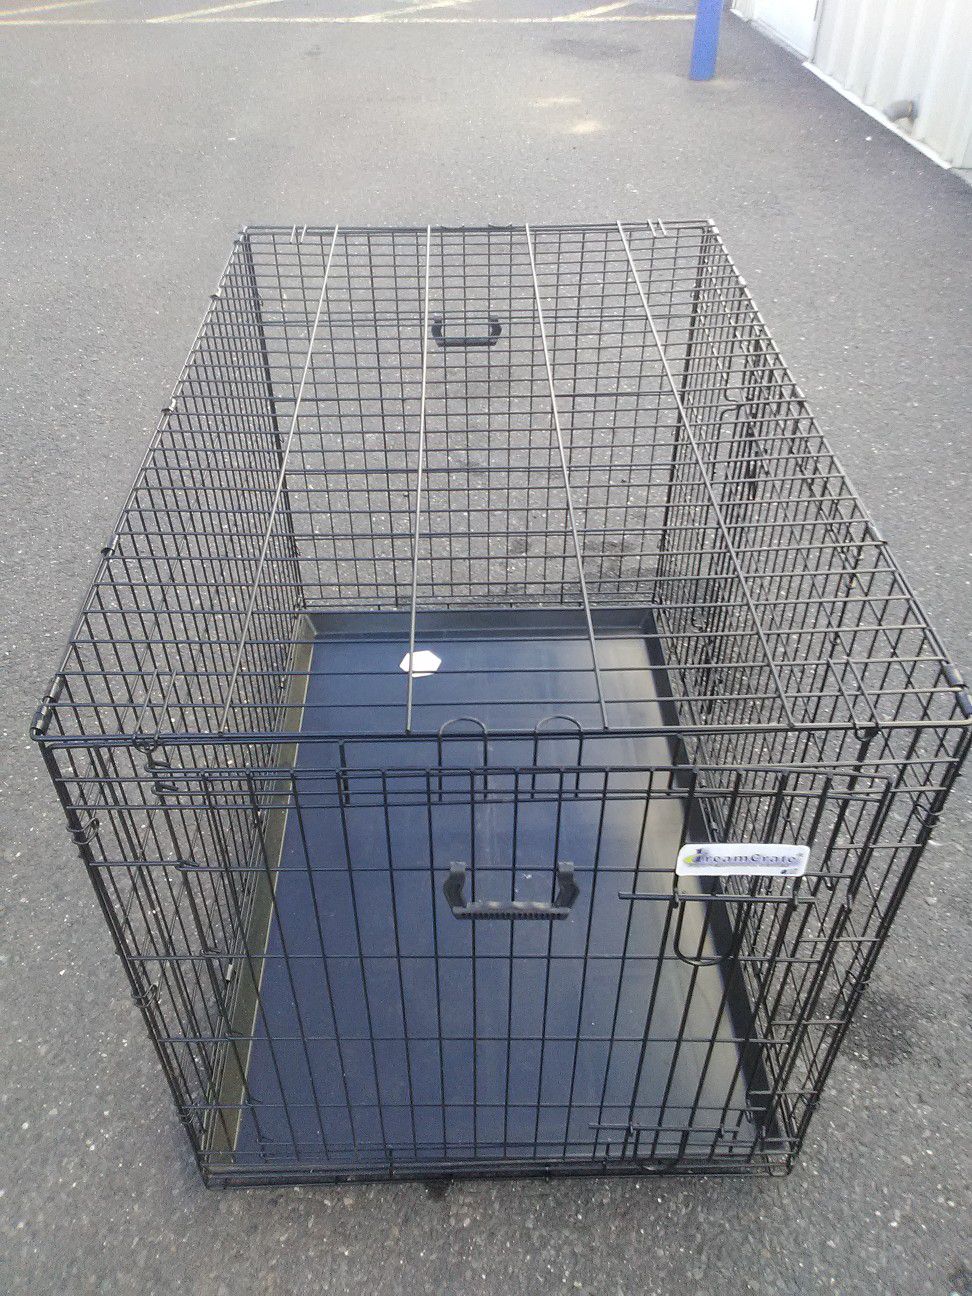 Dog Cage/ Crate extra large new folds for easy Storage or transport includes double doors and bottom changing tray pick up a curbside del. avail